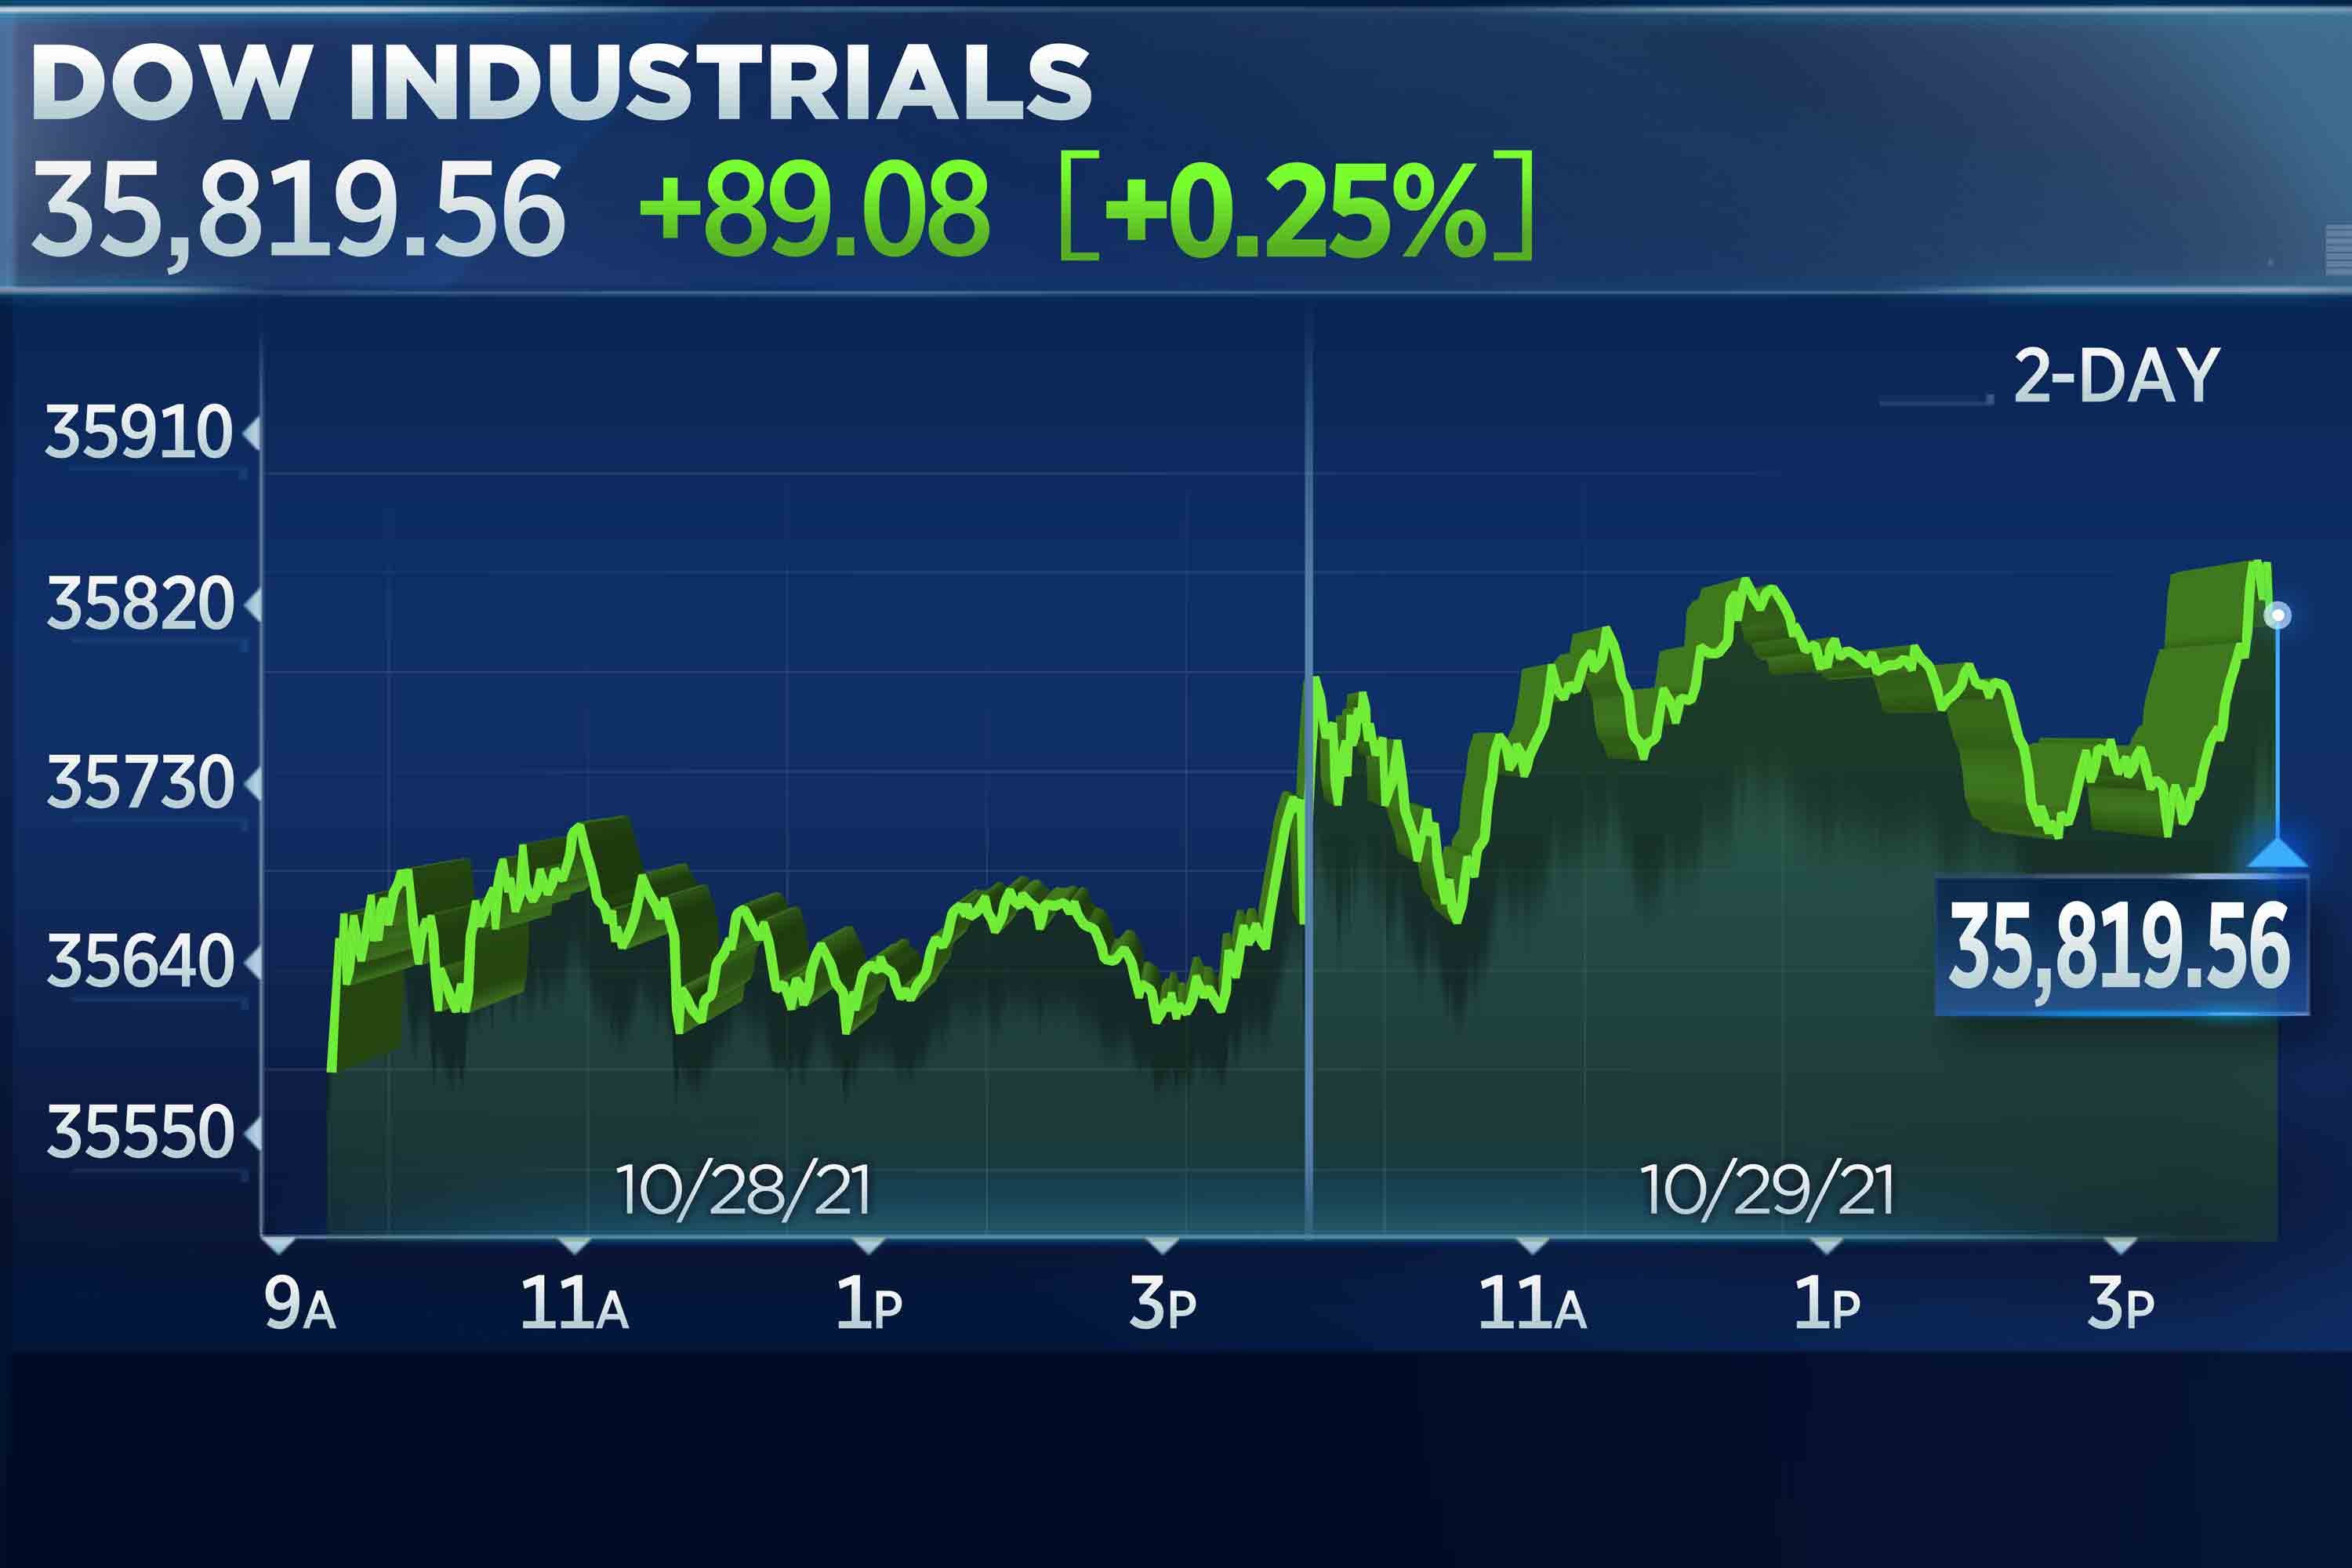 Stocks Close At Record Highs Market Notches Best Month Of The Year Despite Big Tech Earnings Misses